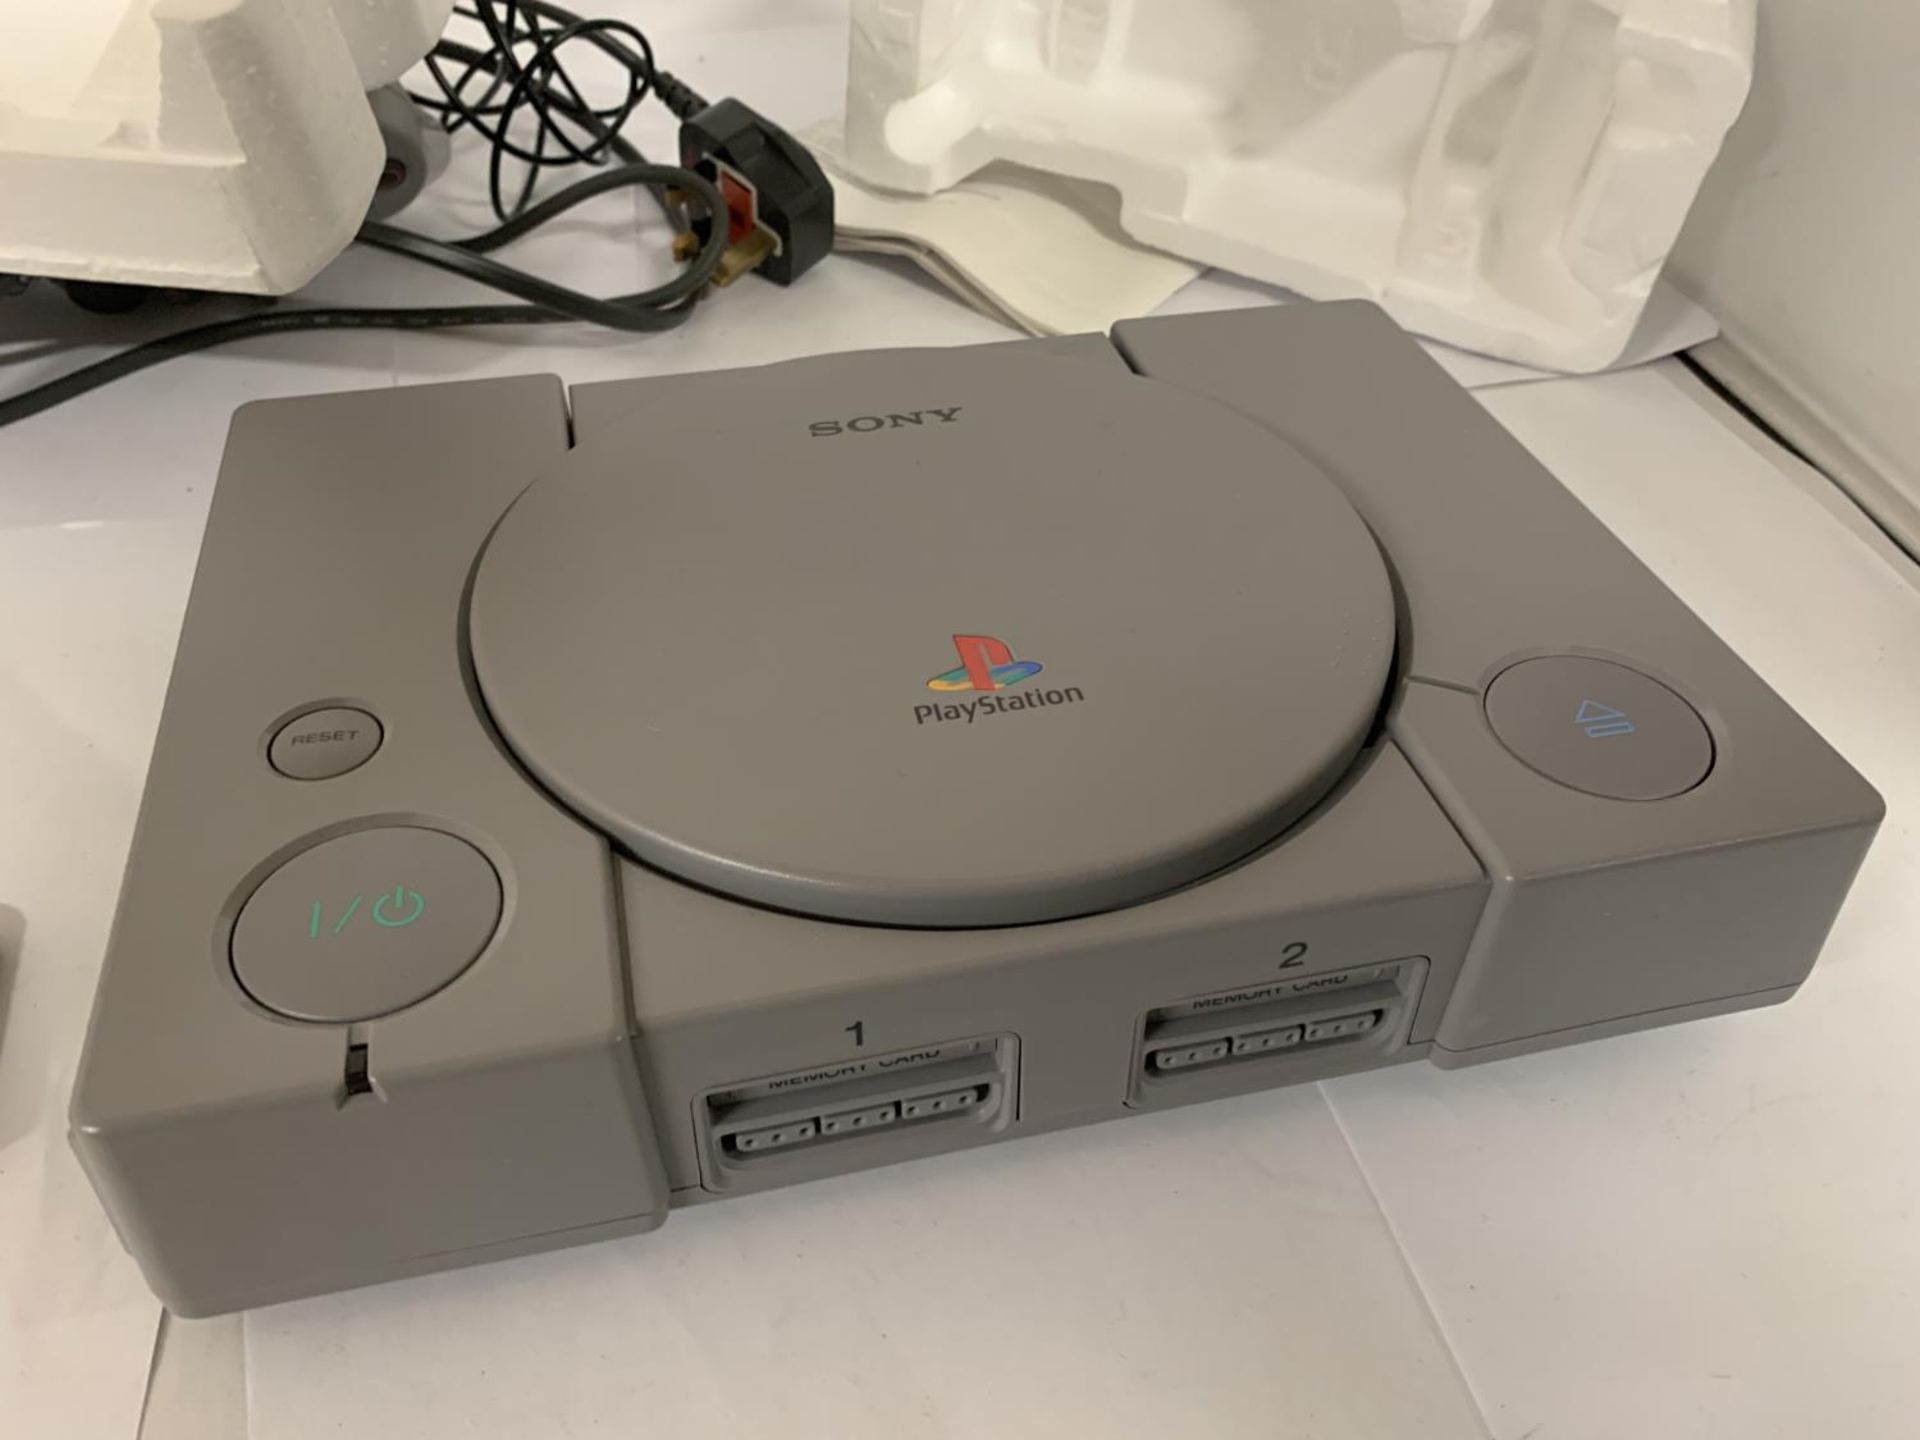 A BOXED PLAYSTATION ONE TOGETHER WITH DUAL SHOCK CONTROLLER - Image 4 of 4